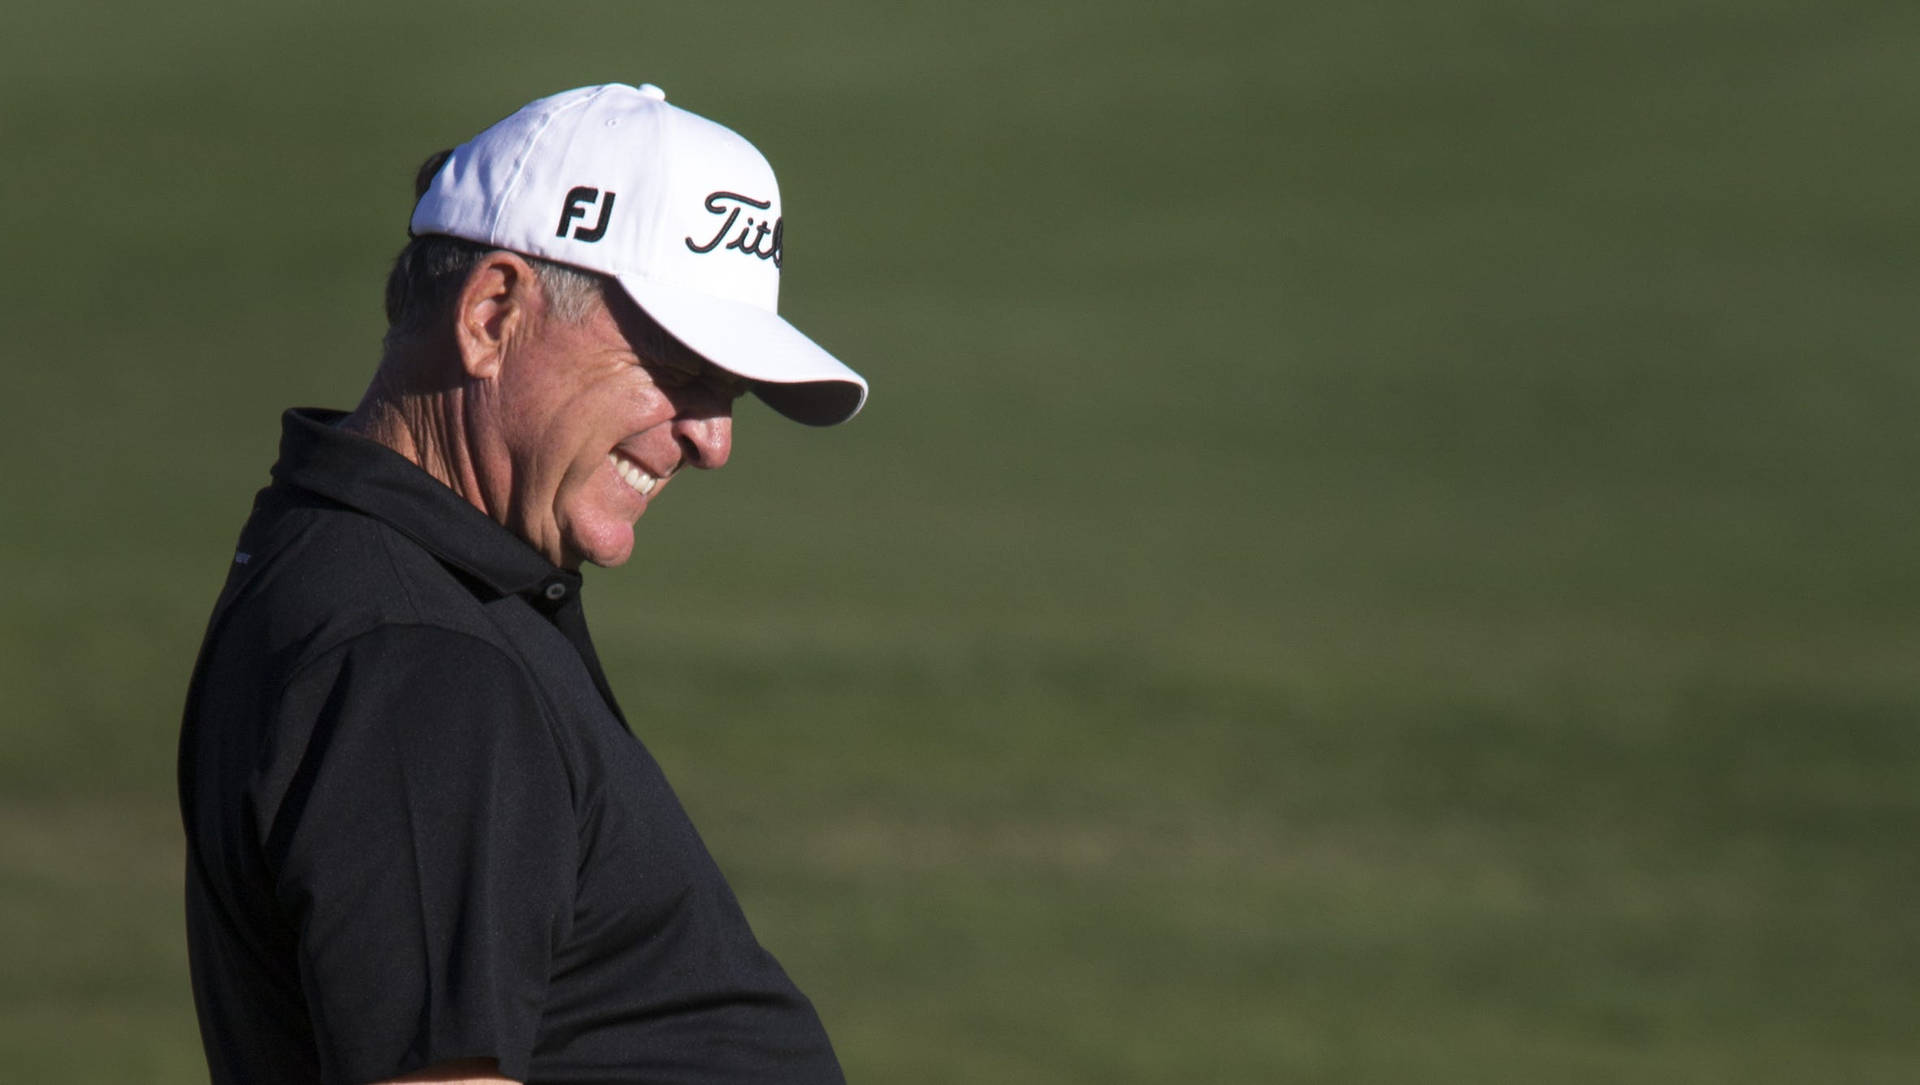 Jay Haas smiling during a golf event Wallpaper